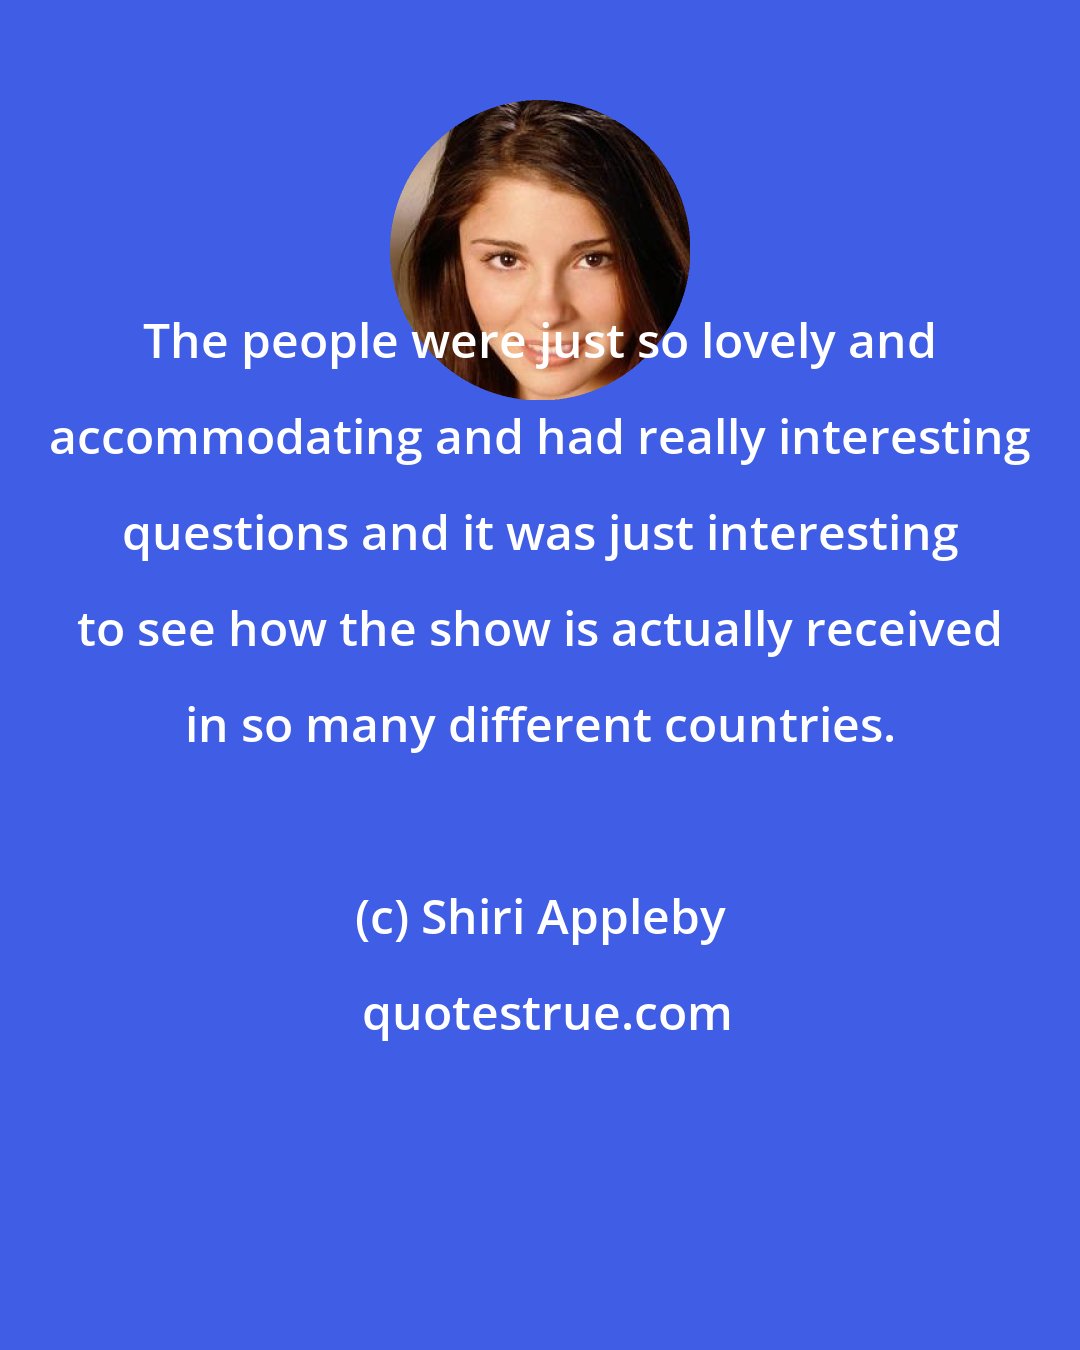 Shiri Appleby: The people were just so lovely and accommodating and had really interesting questions and it was just interesting to see how the show is actually received in so many different countries.